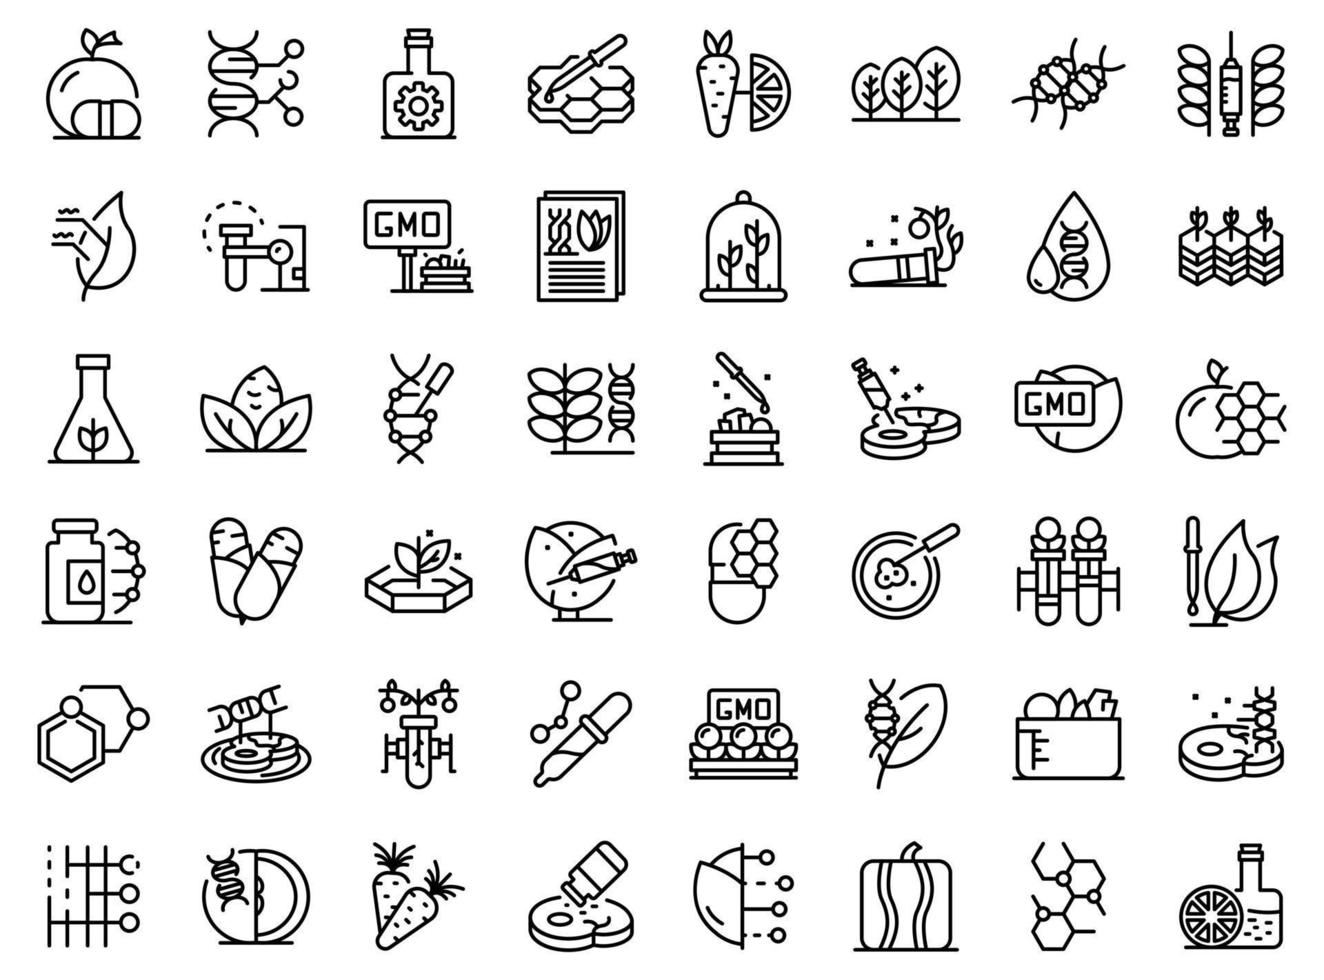 Gmo food icons set, outline style vector